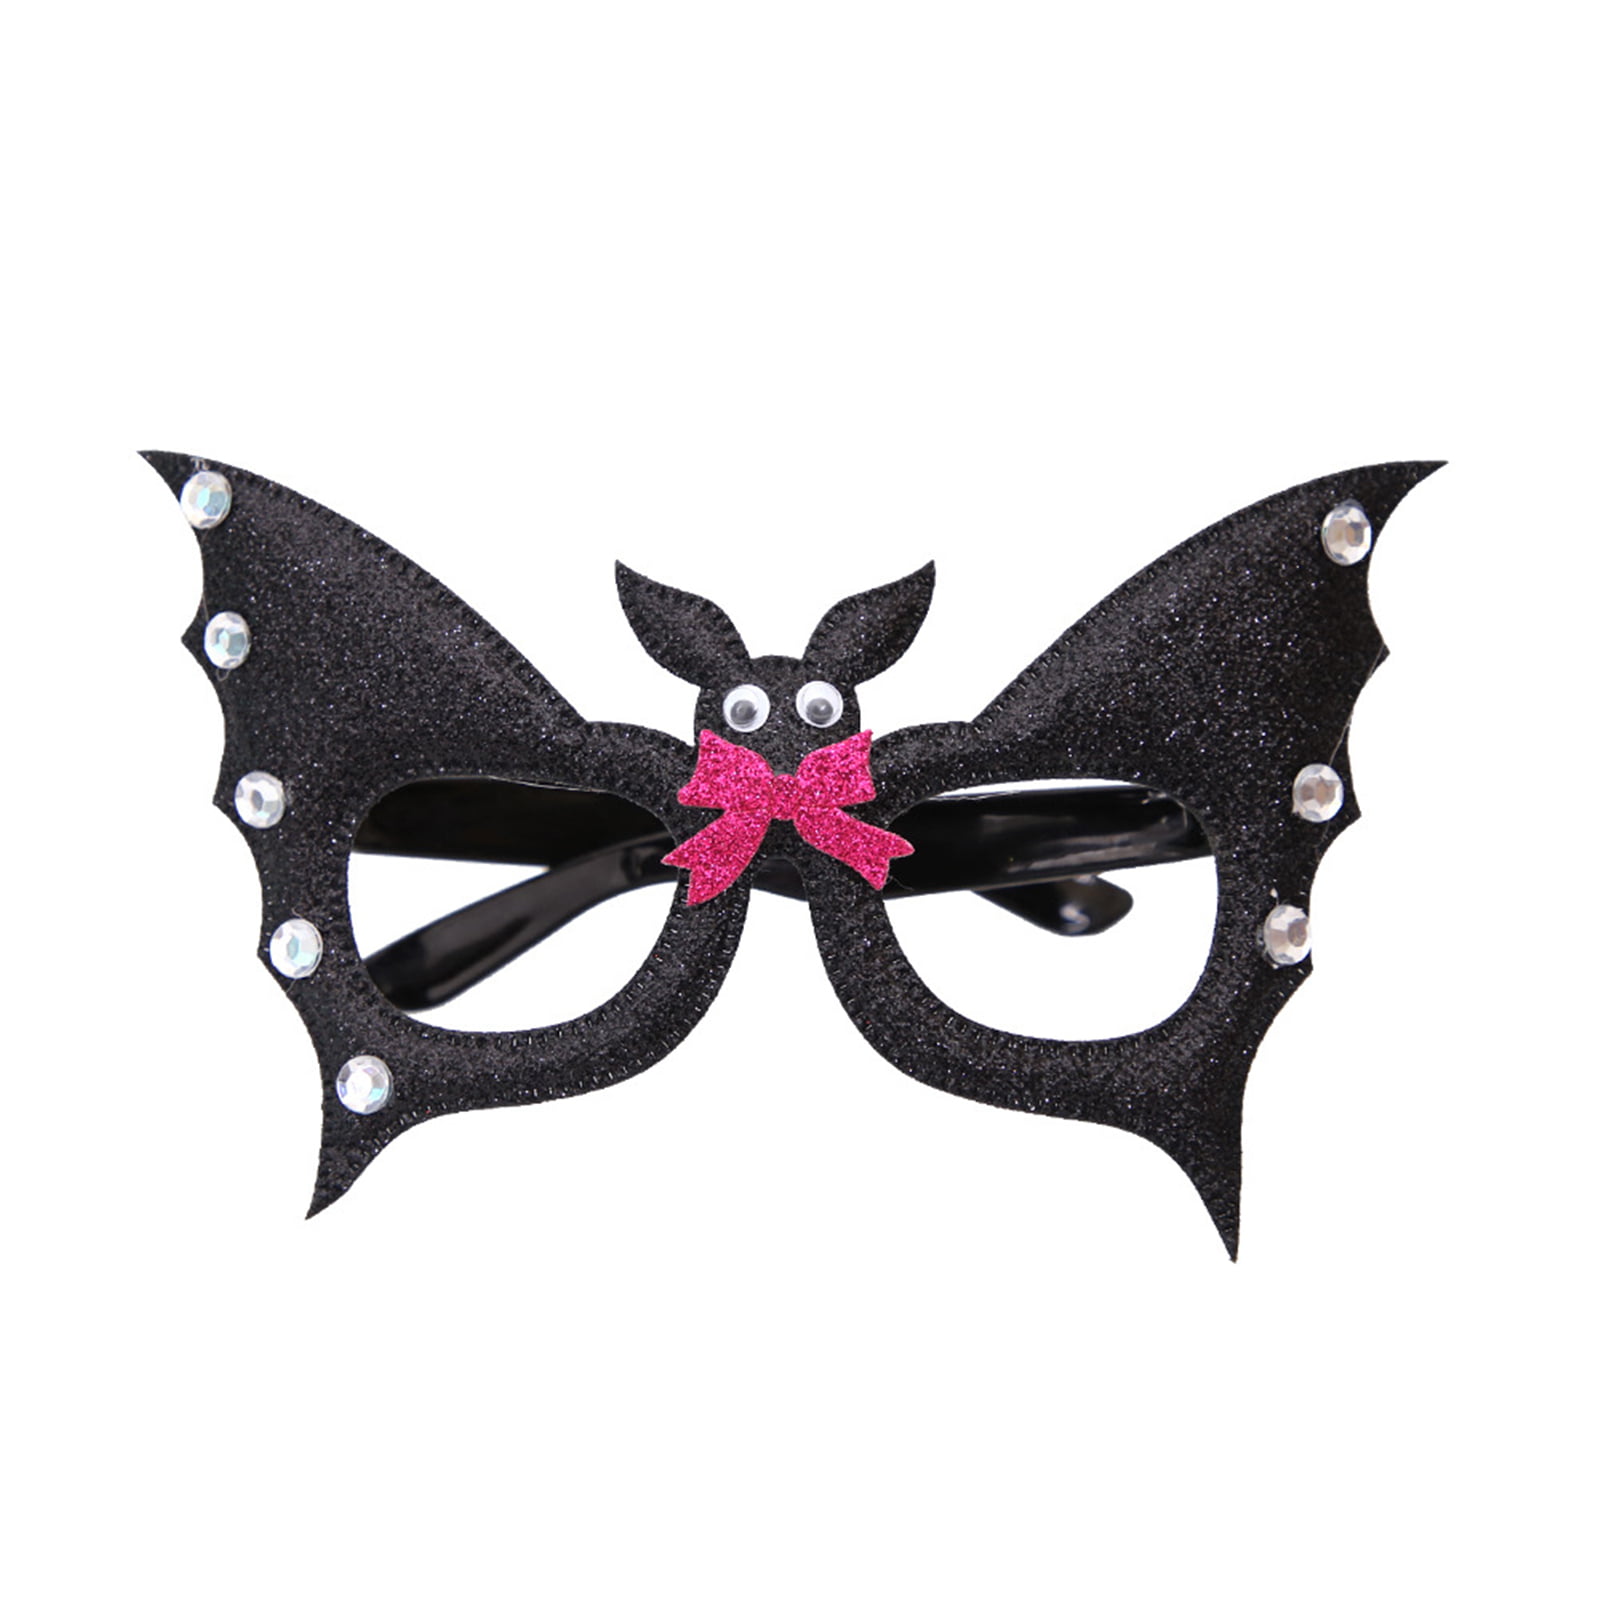 Hands Cover Shaped Eyes Mask Party Glasses Funny Mask Holloween Fancy Costume